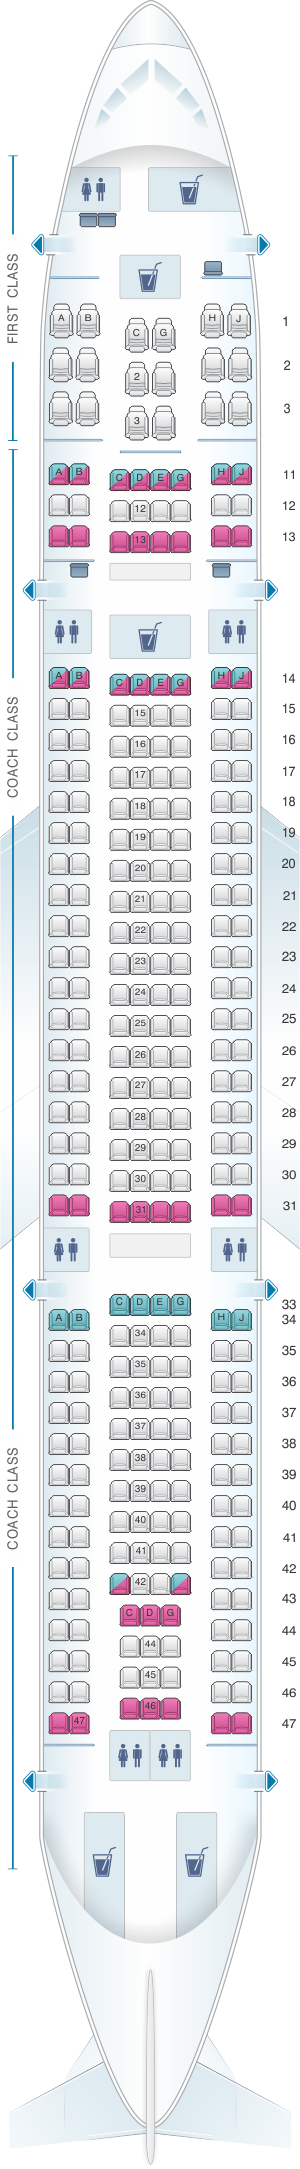 Seat Map Hawaiian Airlines Airbus A330 200 | SeatMaestro.com